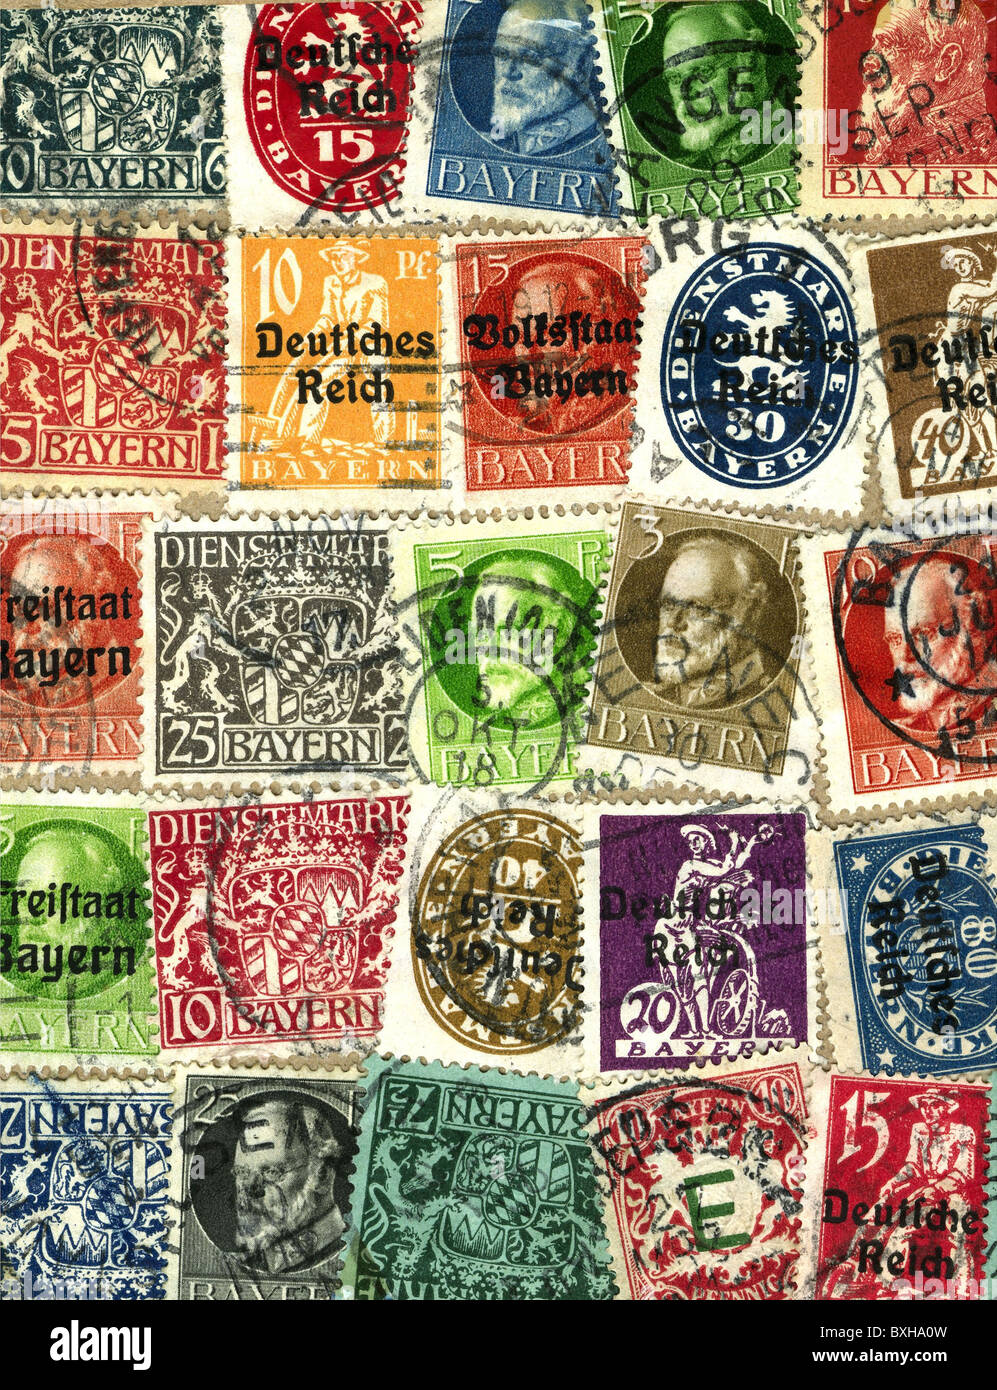 mail / post, postage stamps, Bavarian stamps, Bavaria, Germany, 1912 to 1920, Additional-Rights-Clearences-Not Available Stock Photo